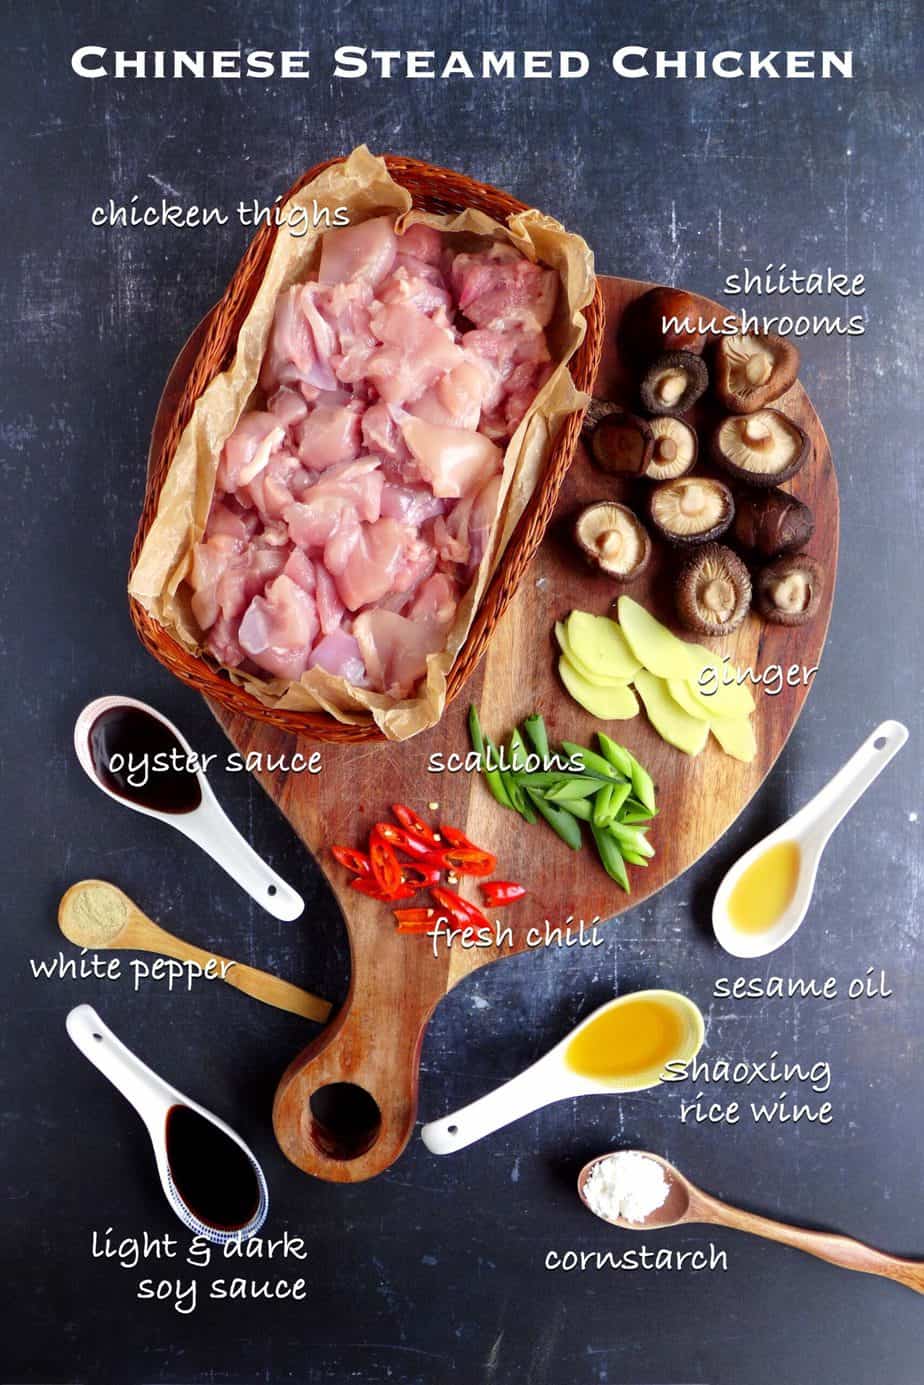 Ingredients for making Chinese steamed chicken with mushroom